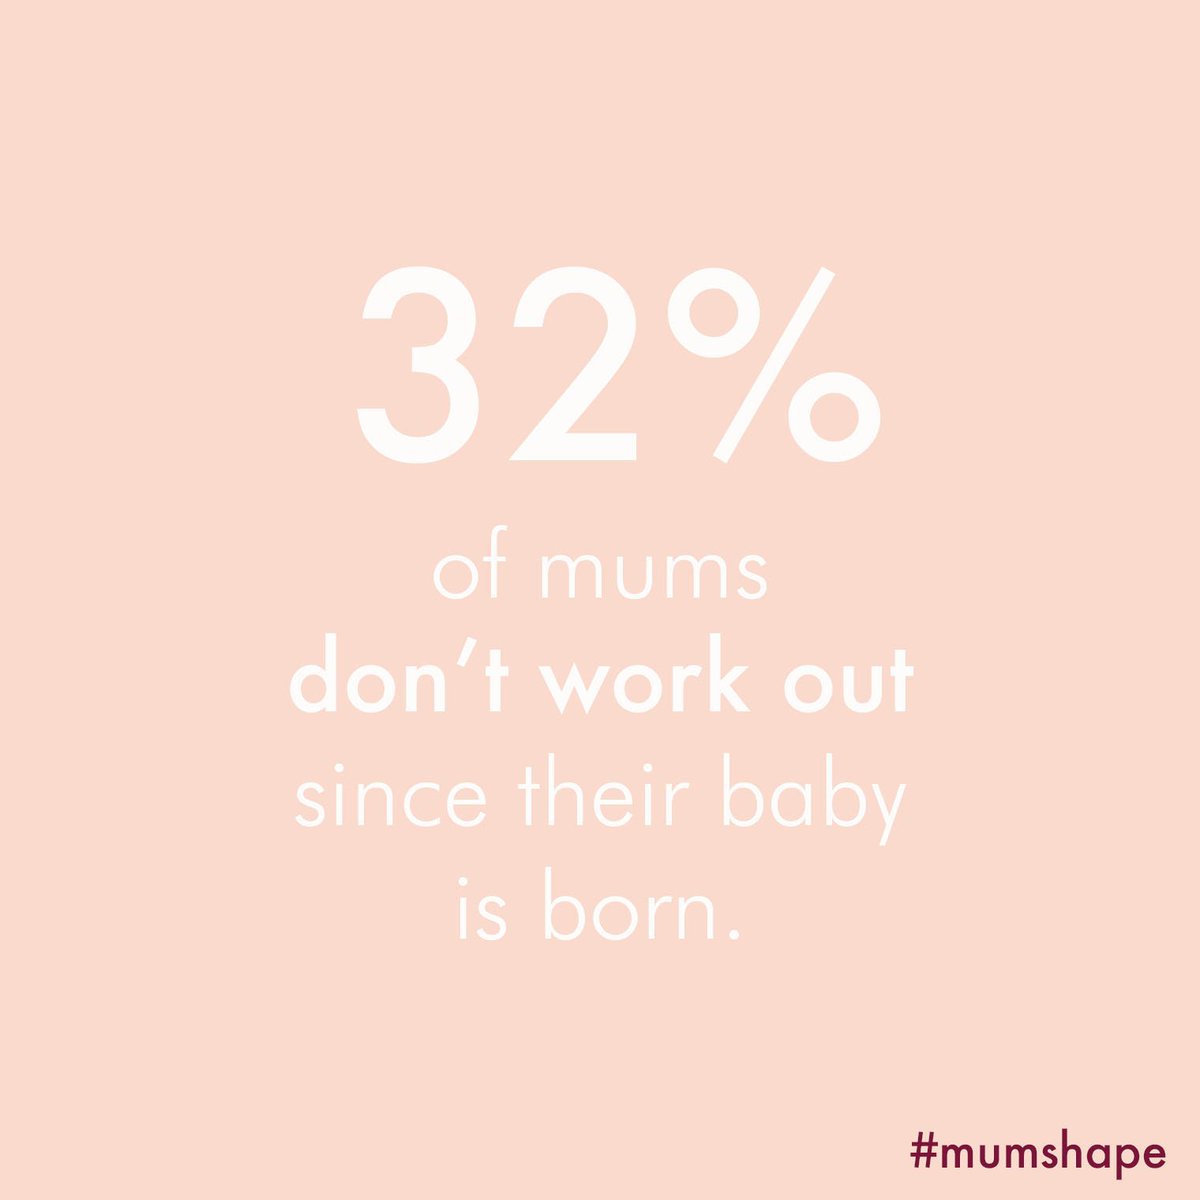 32% of mums don’t work out since their baby is born! 
Mummy find the perfect workout class for you and bring your baby!
#mumshape #activemum #fitmum #londonmum #healthymum #mummy #baby #workout #activelifestyle #pregnancy #yoga #pilates #prenatal #postnatal #startup